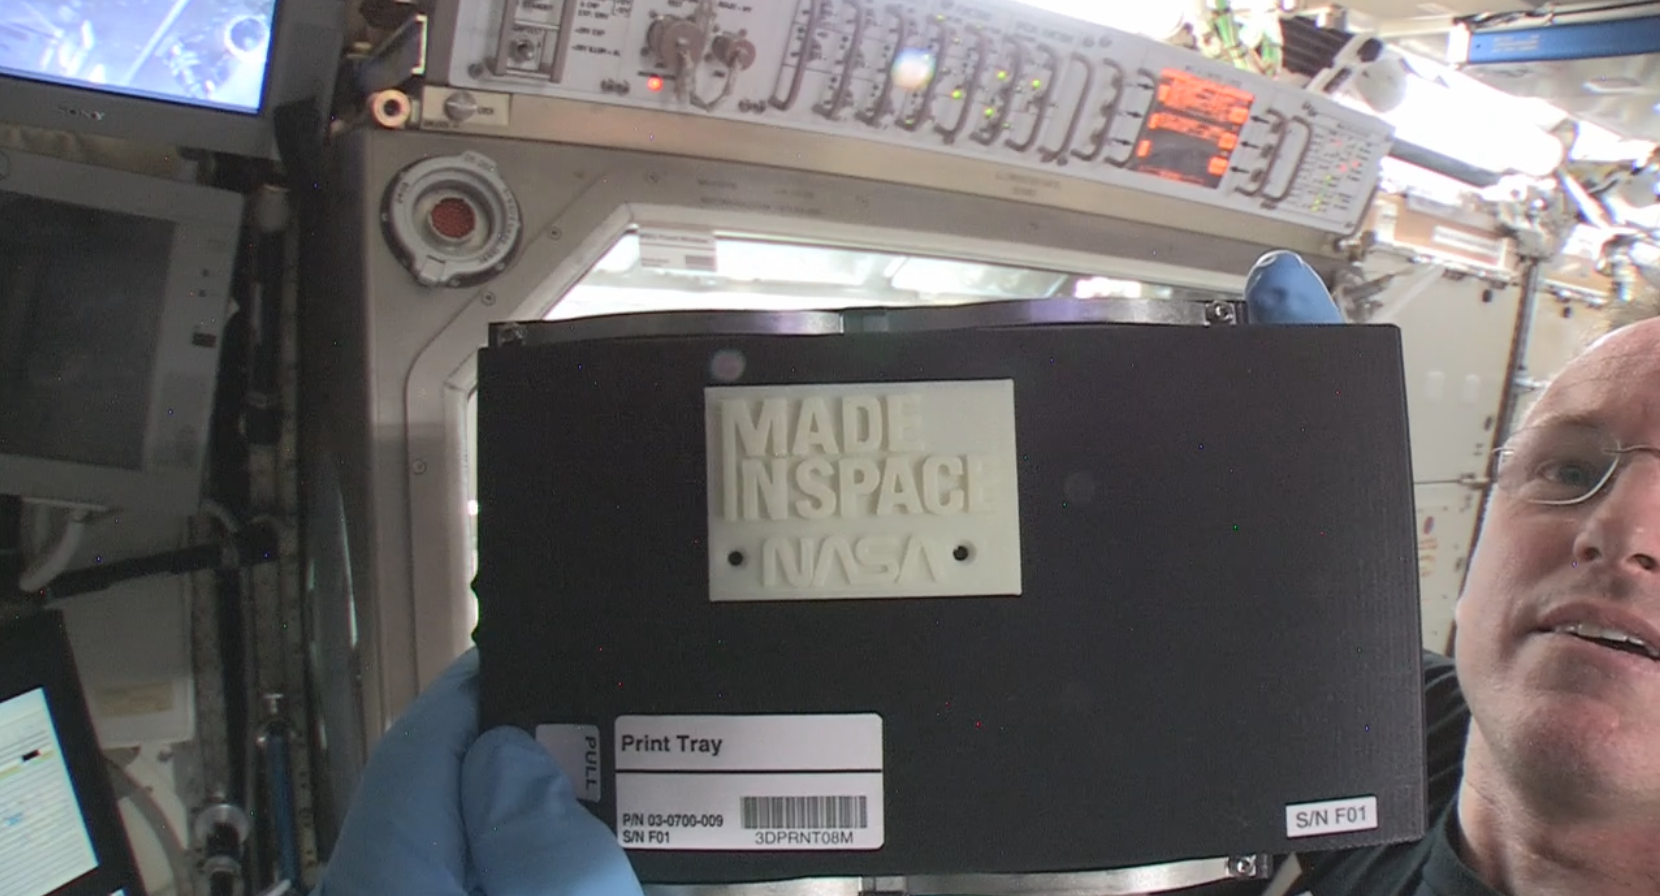 International Space Station Commander Barry “Butch” Wilmore holds up the first object made in space with 3-D printing. Wilmore installed the printer on Nov. 17, 2014, and helped crews on the ground with the first print on Nov. 25, 2014. (NASA)